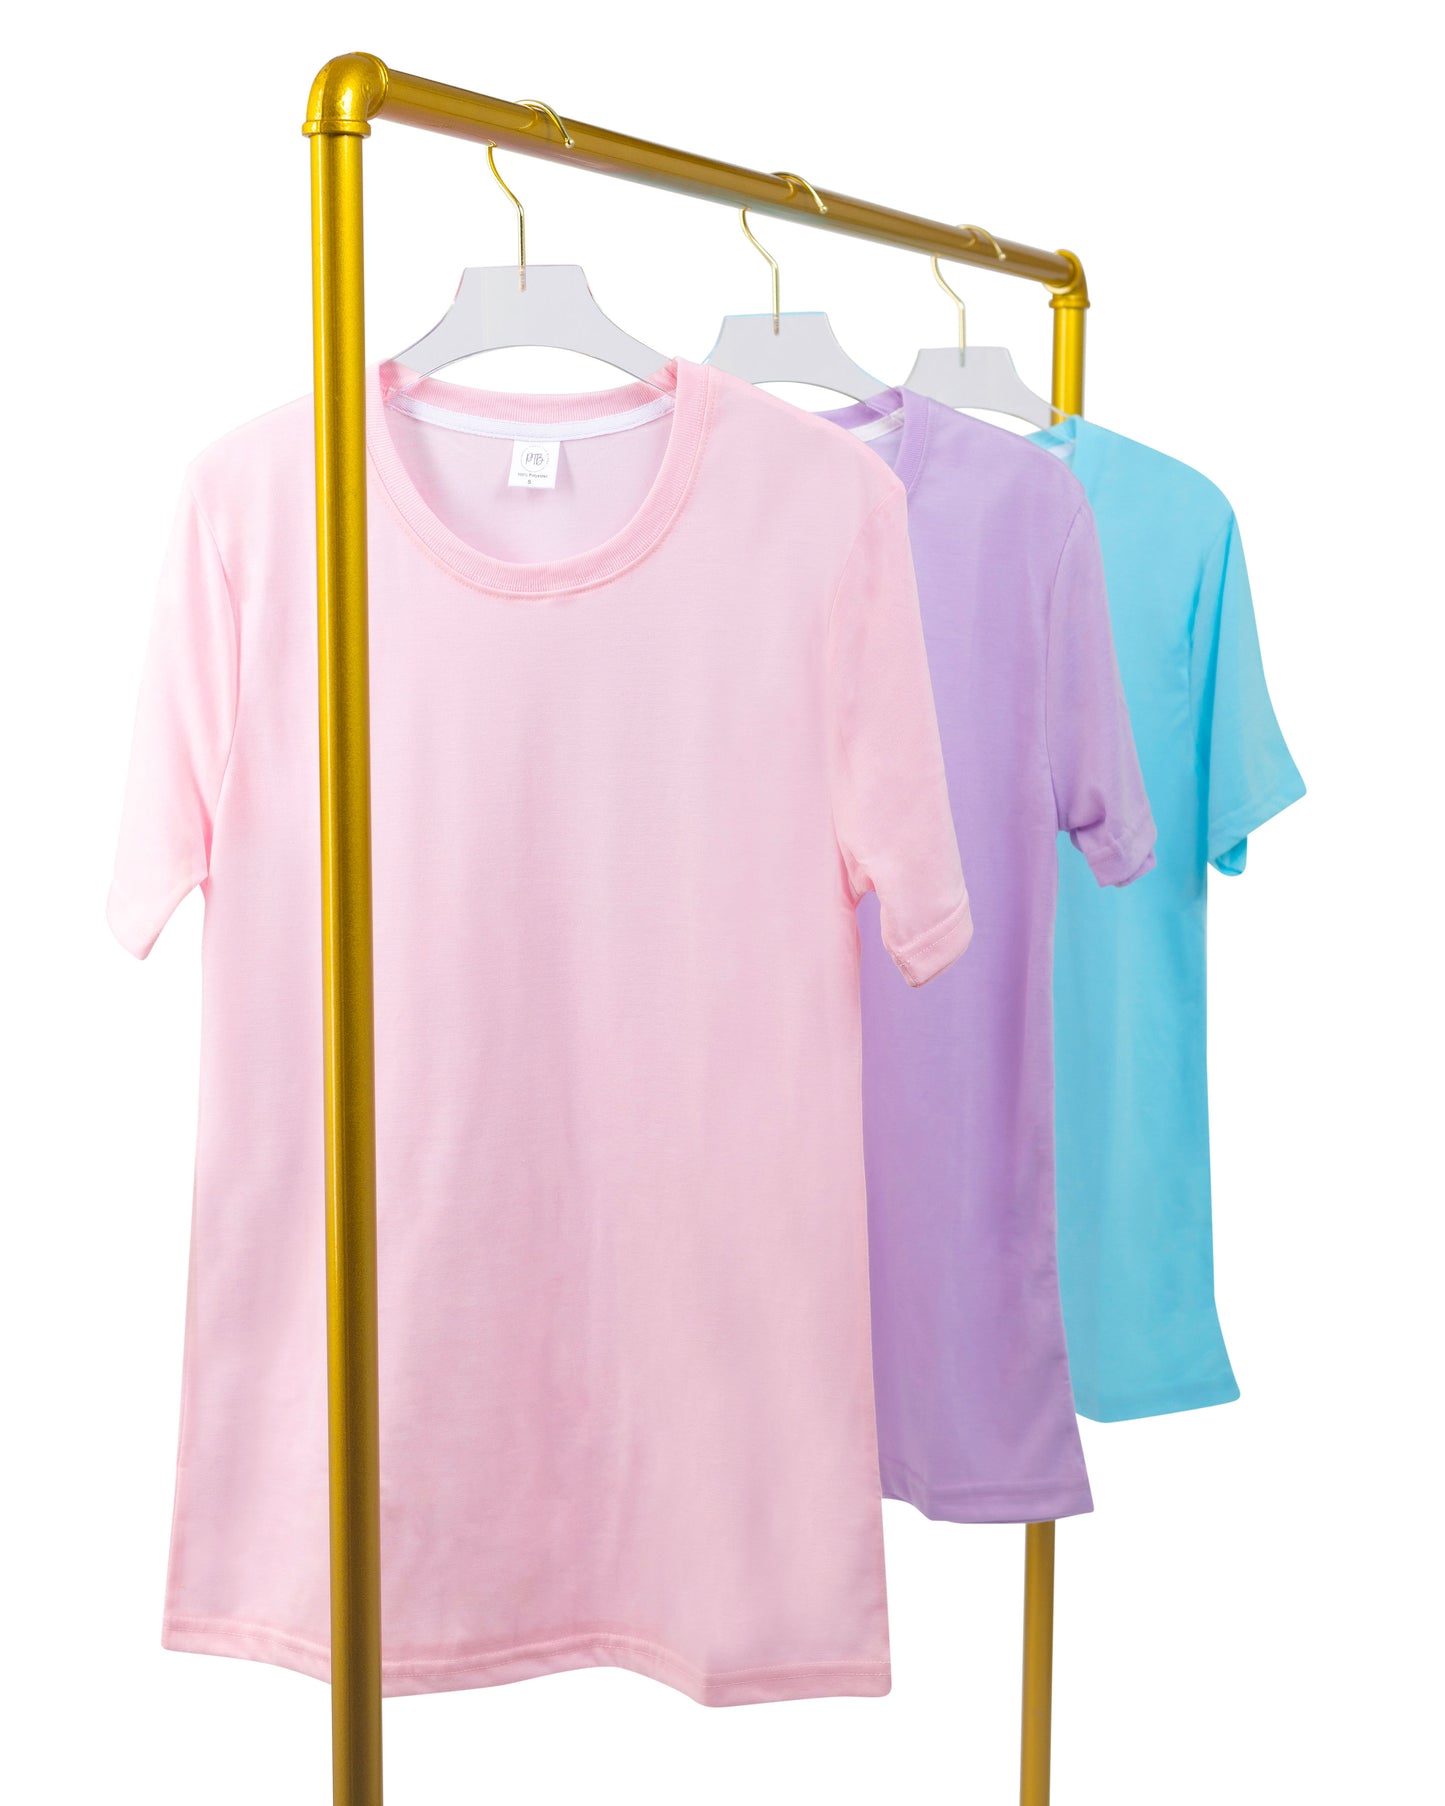 COTTON CANDY COLLECTION 100% POLYESTER ADULT SHORT SLEEVE SHIRT